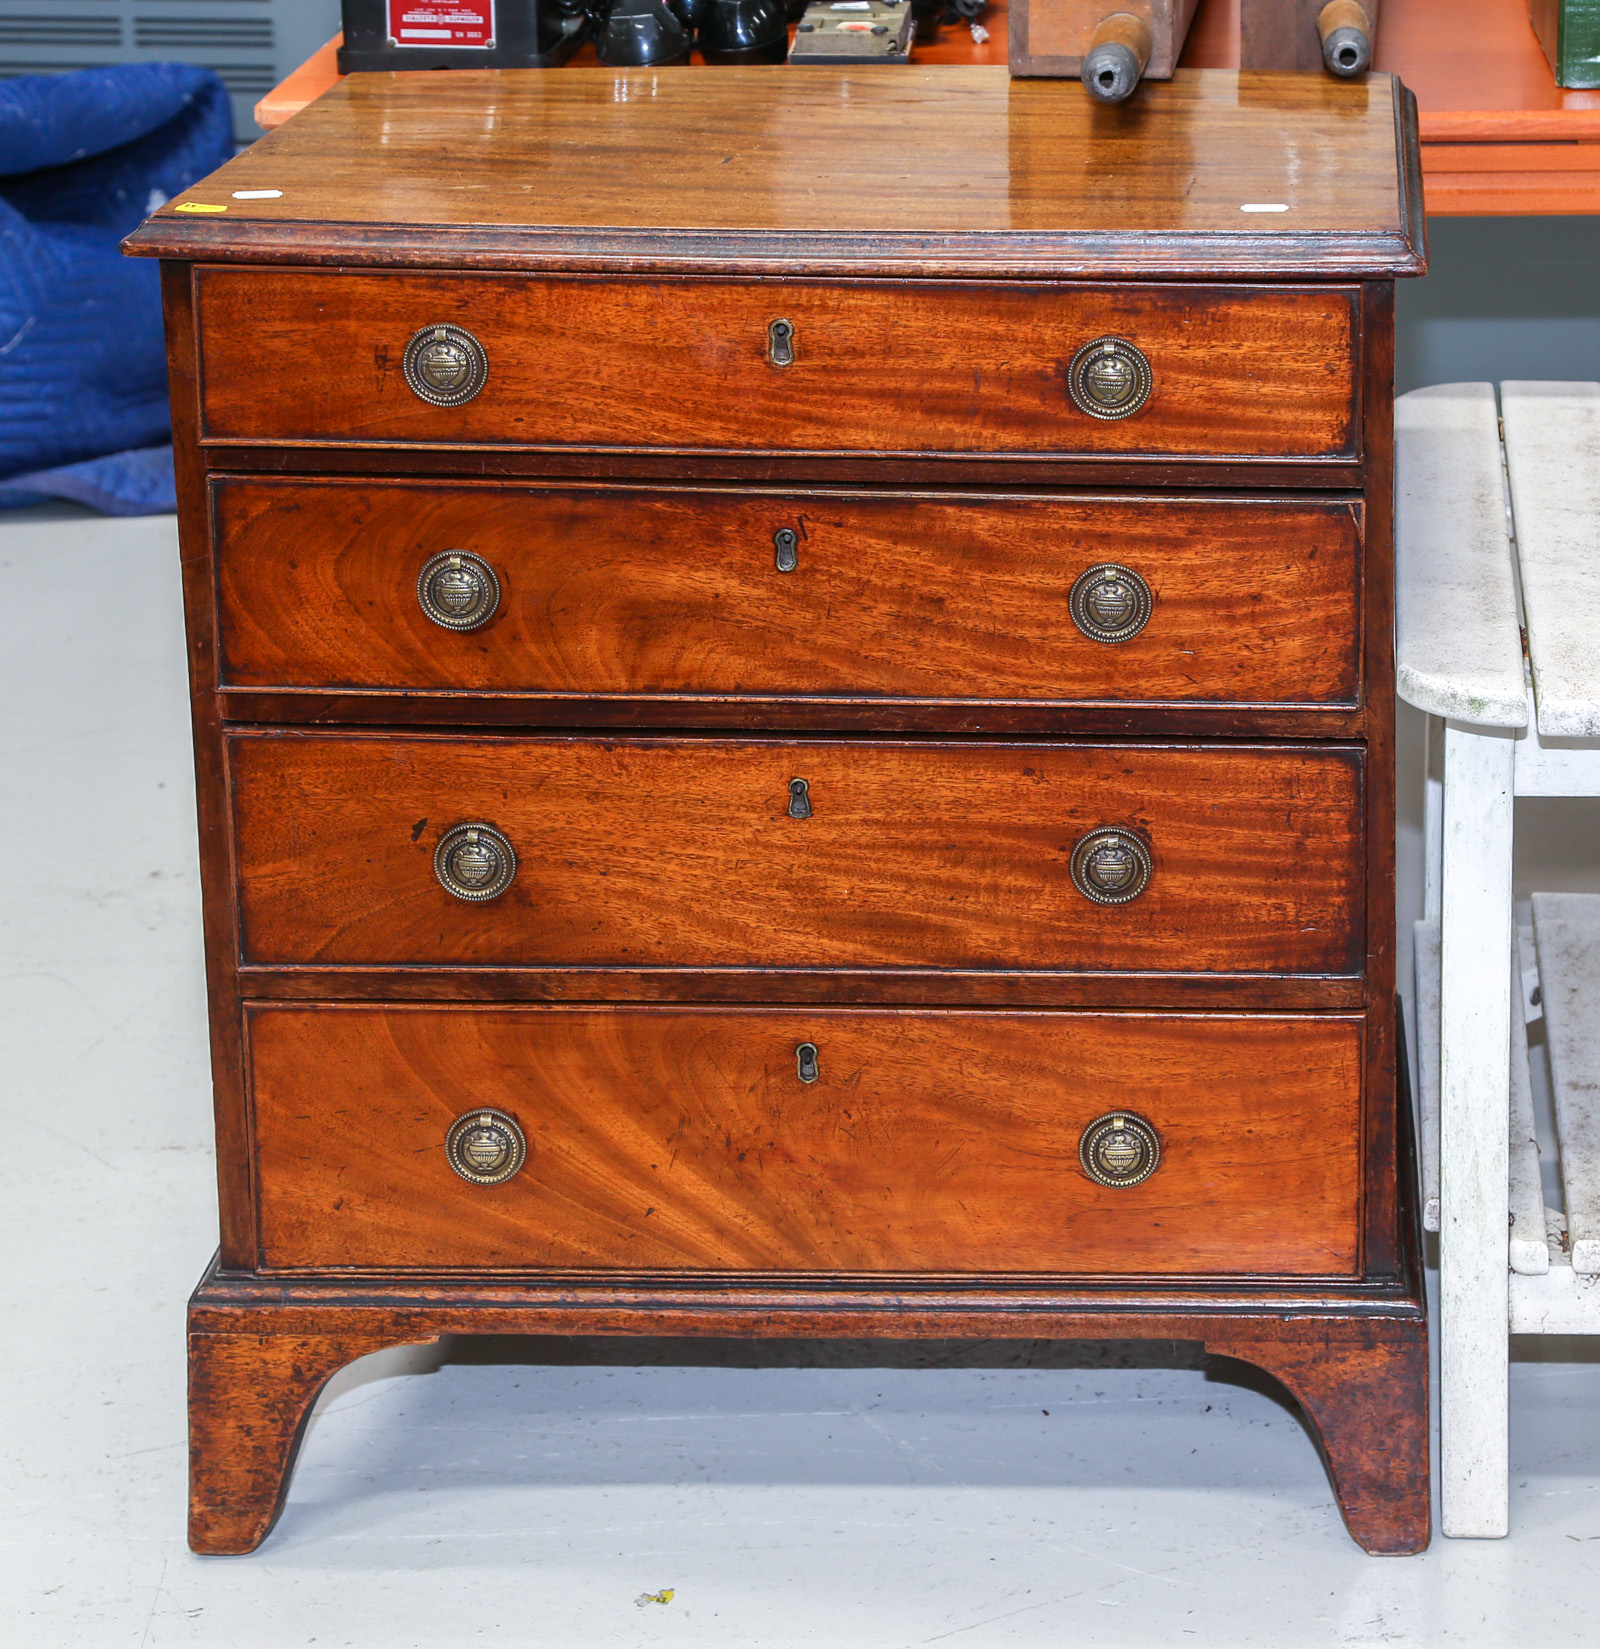 ANTIQUE MAHOGANY CHEST OF DRAWERS Possibly